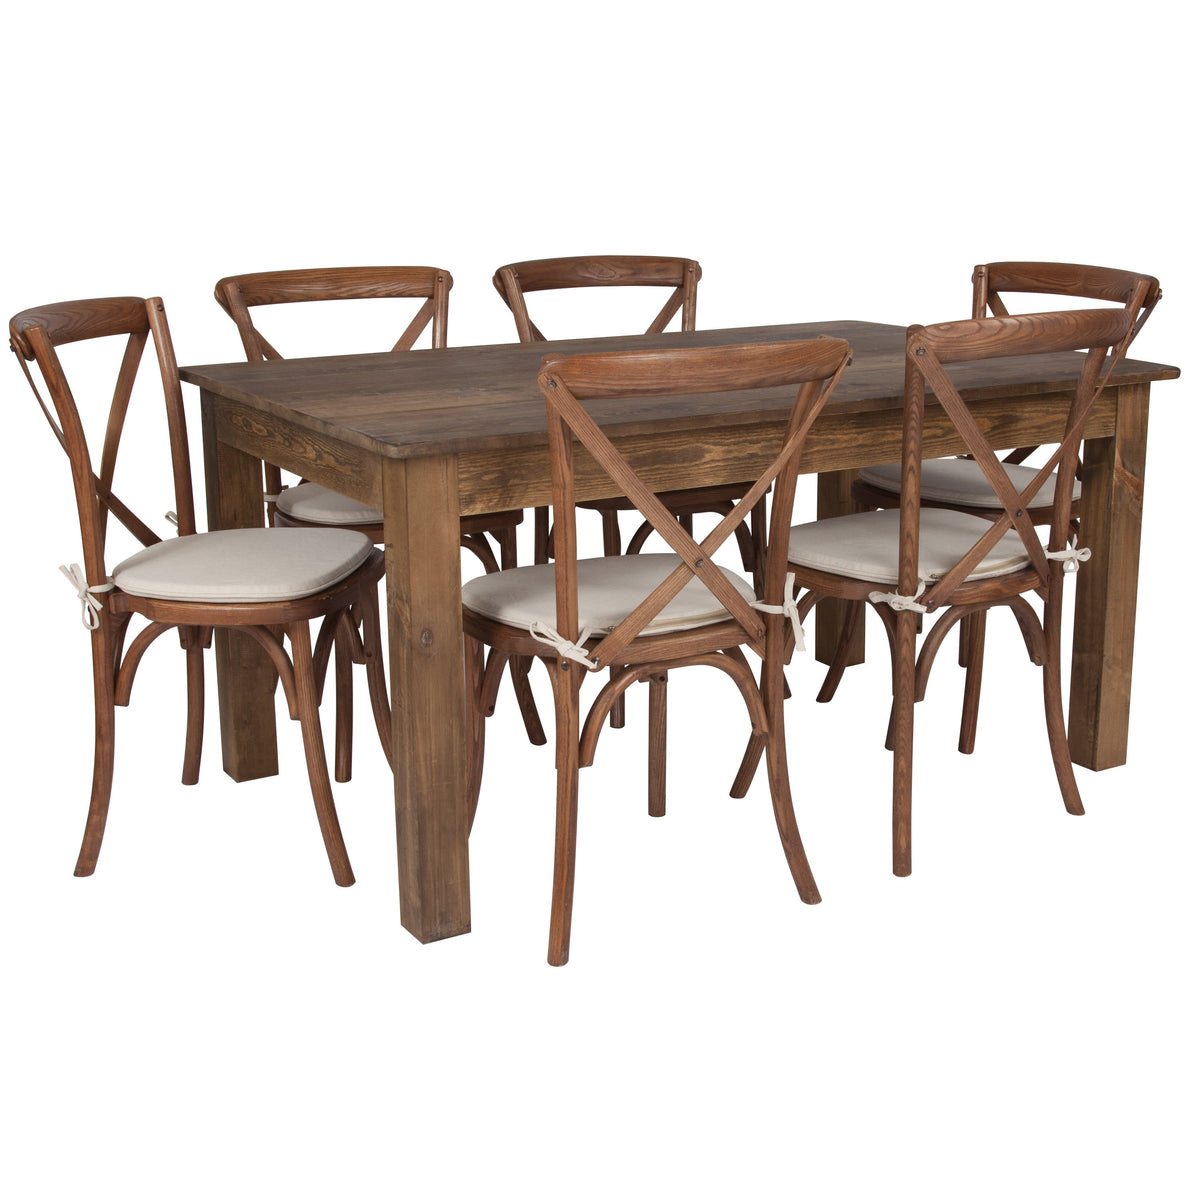 60inch x 38inch Antique Rustic Farm Table Set with 6 Cross Back Chairs and Cushions